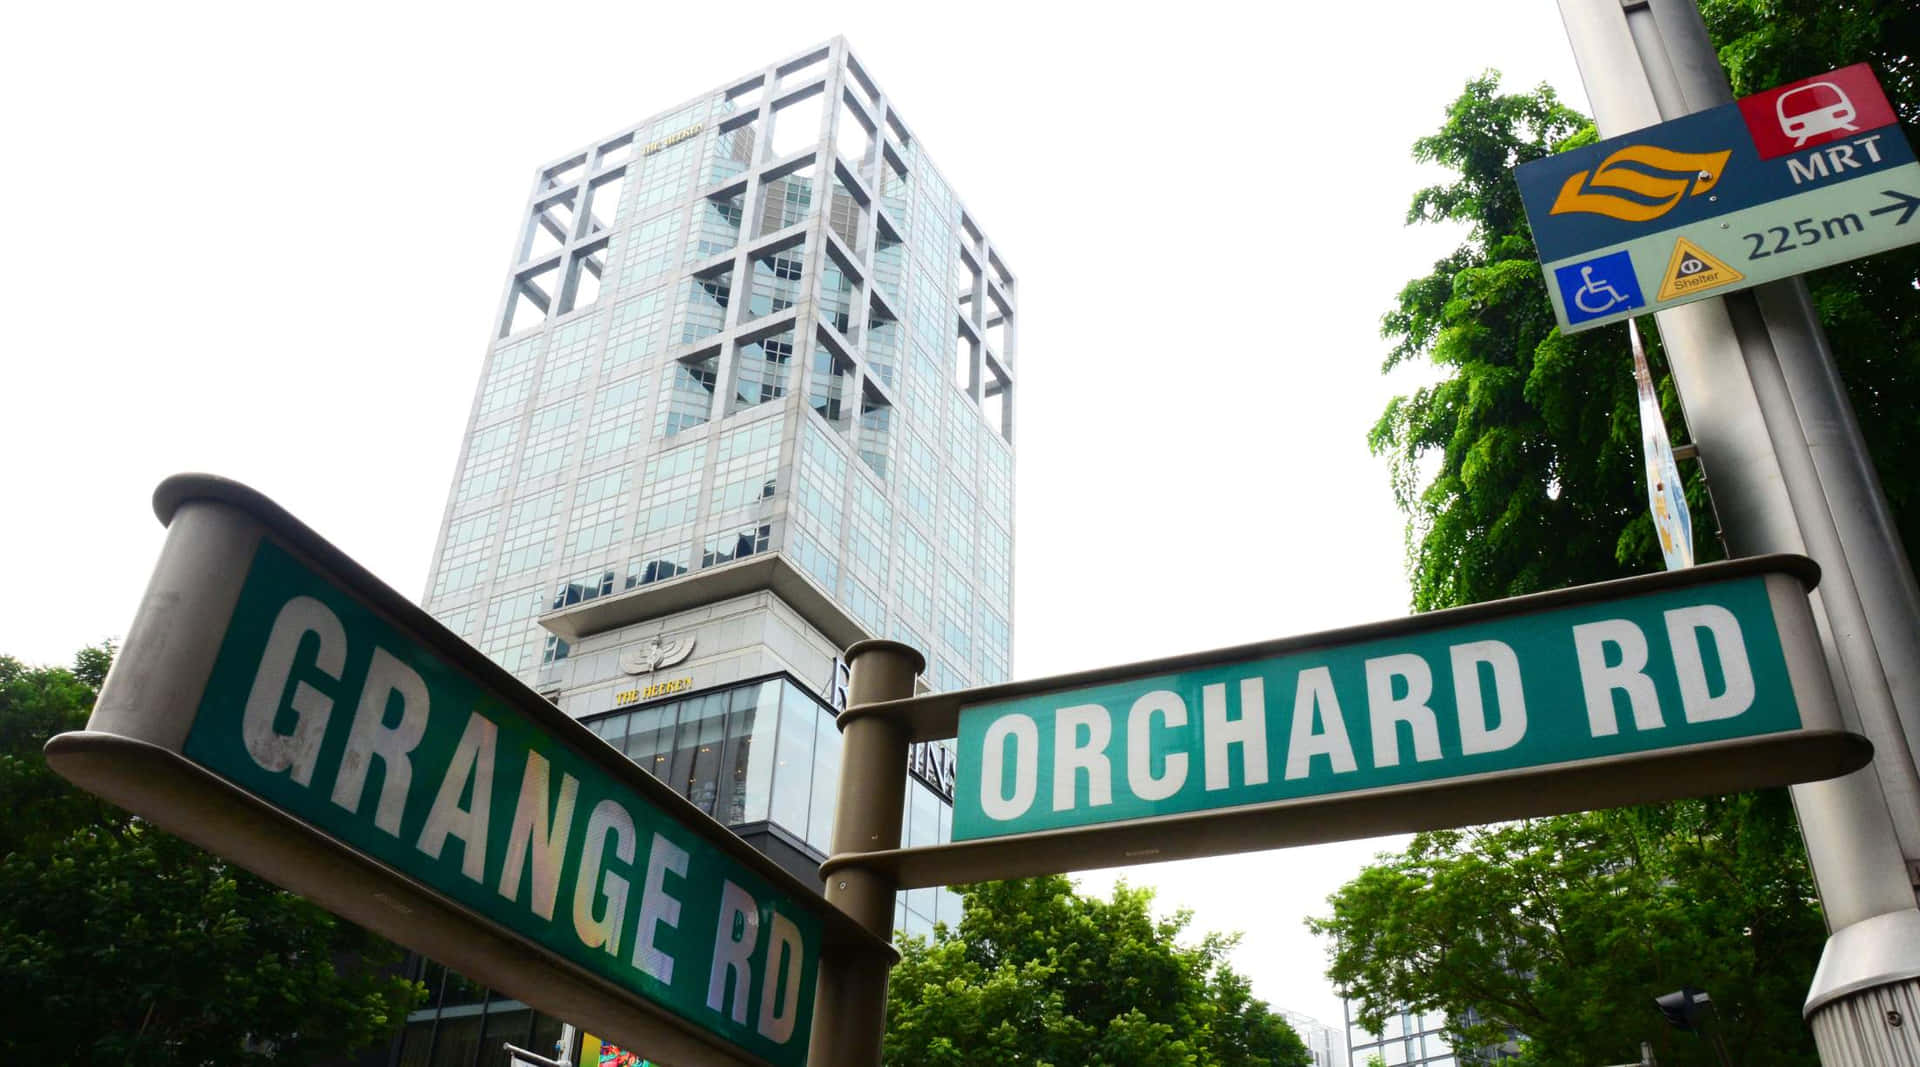 Orchard Road Singapore Signage Wallpaper